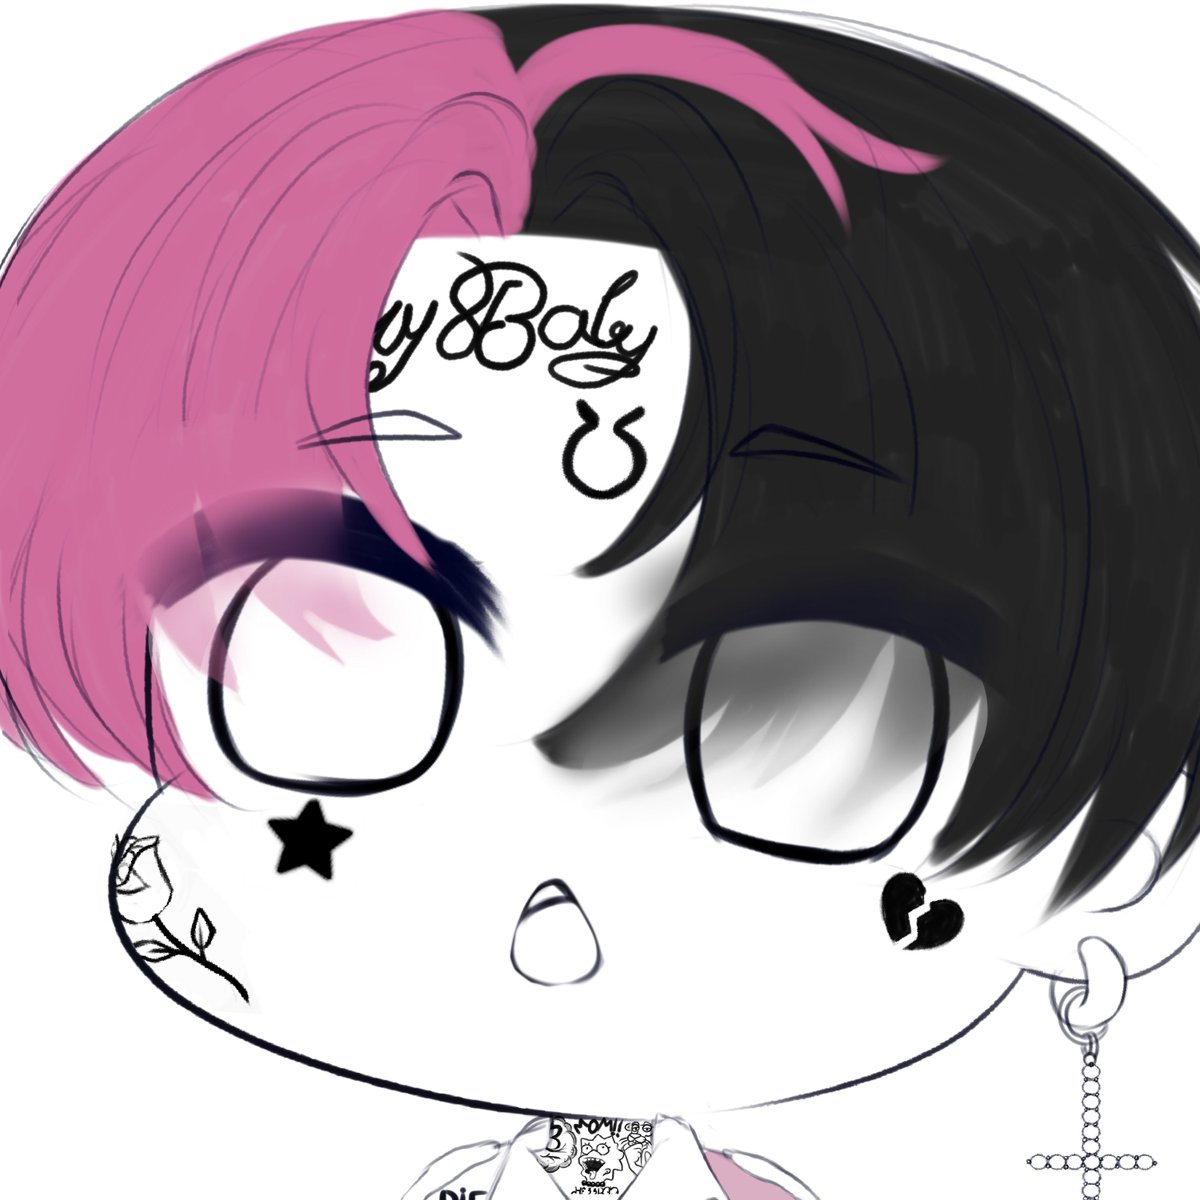 Quick sketch for #commission <3
#draw #drawing #twitchemote #emote #chibi #commissionsopen #commissions #digitalart #twitch #emotes #sketch